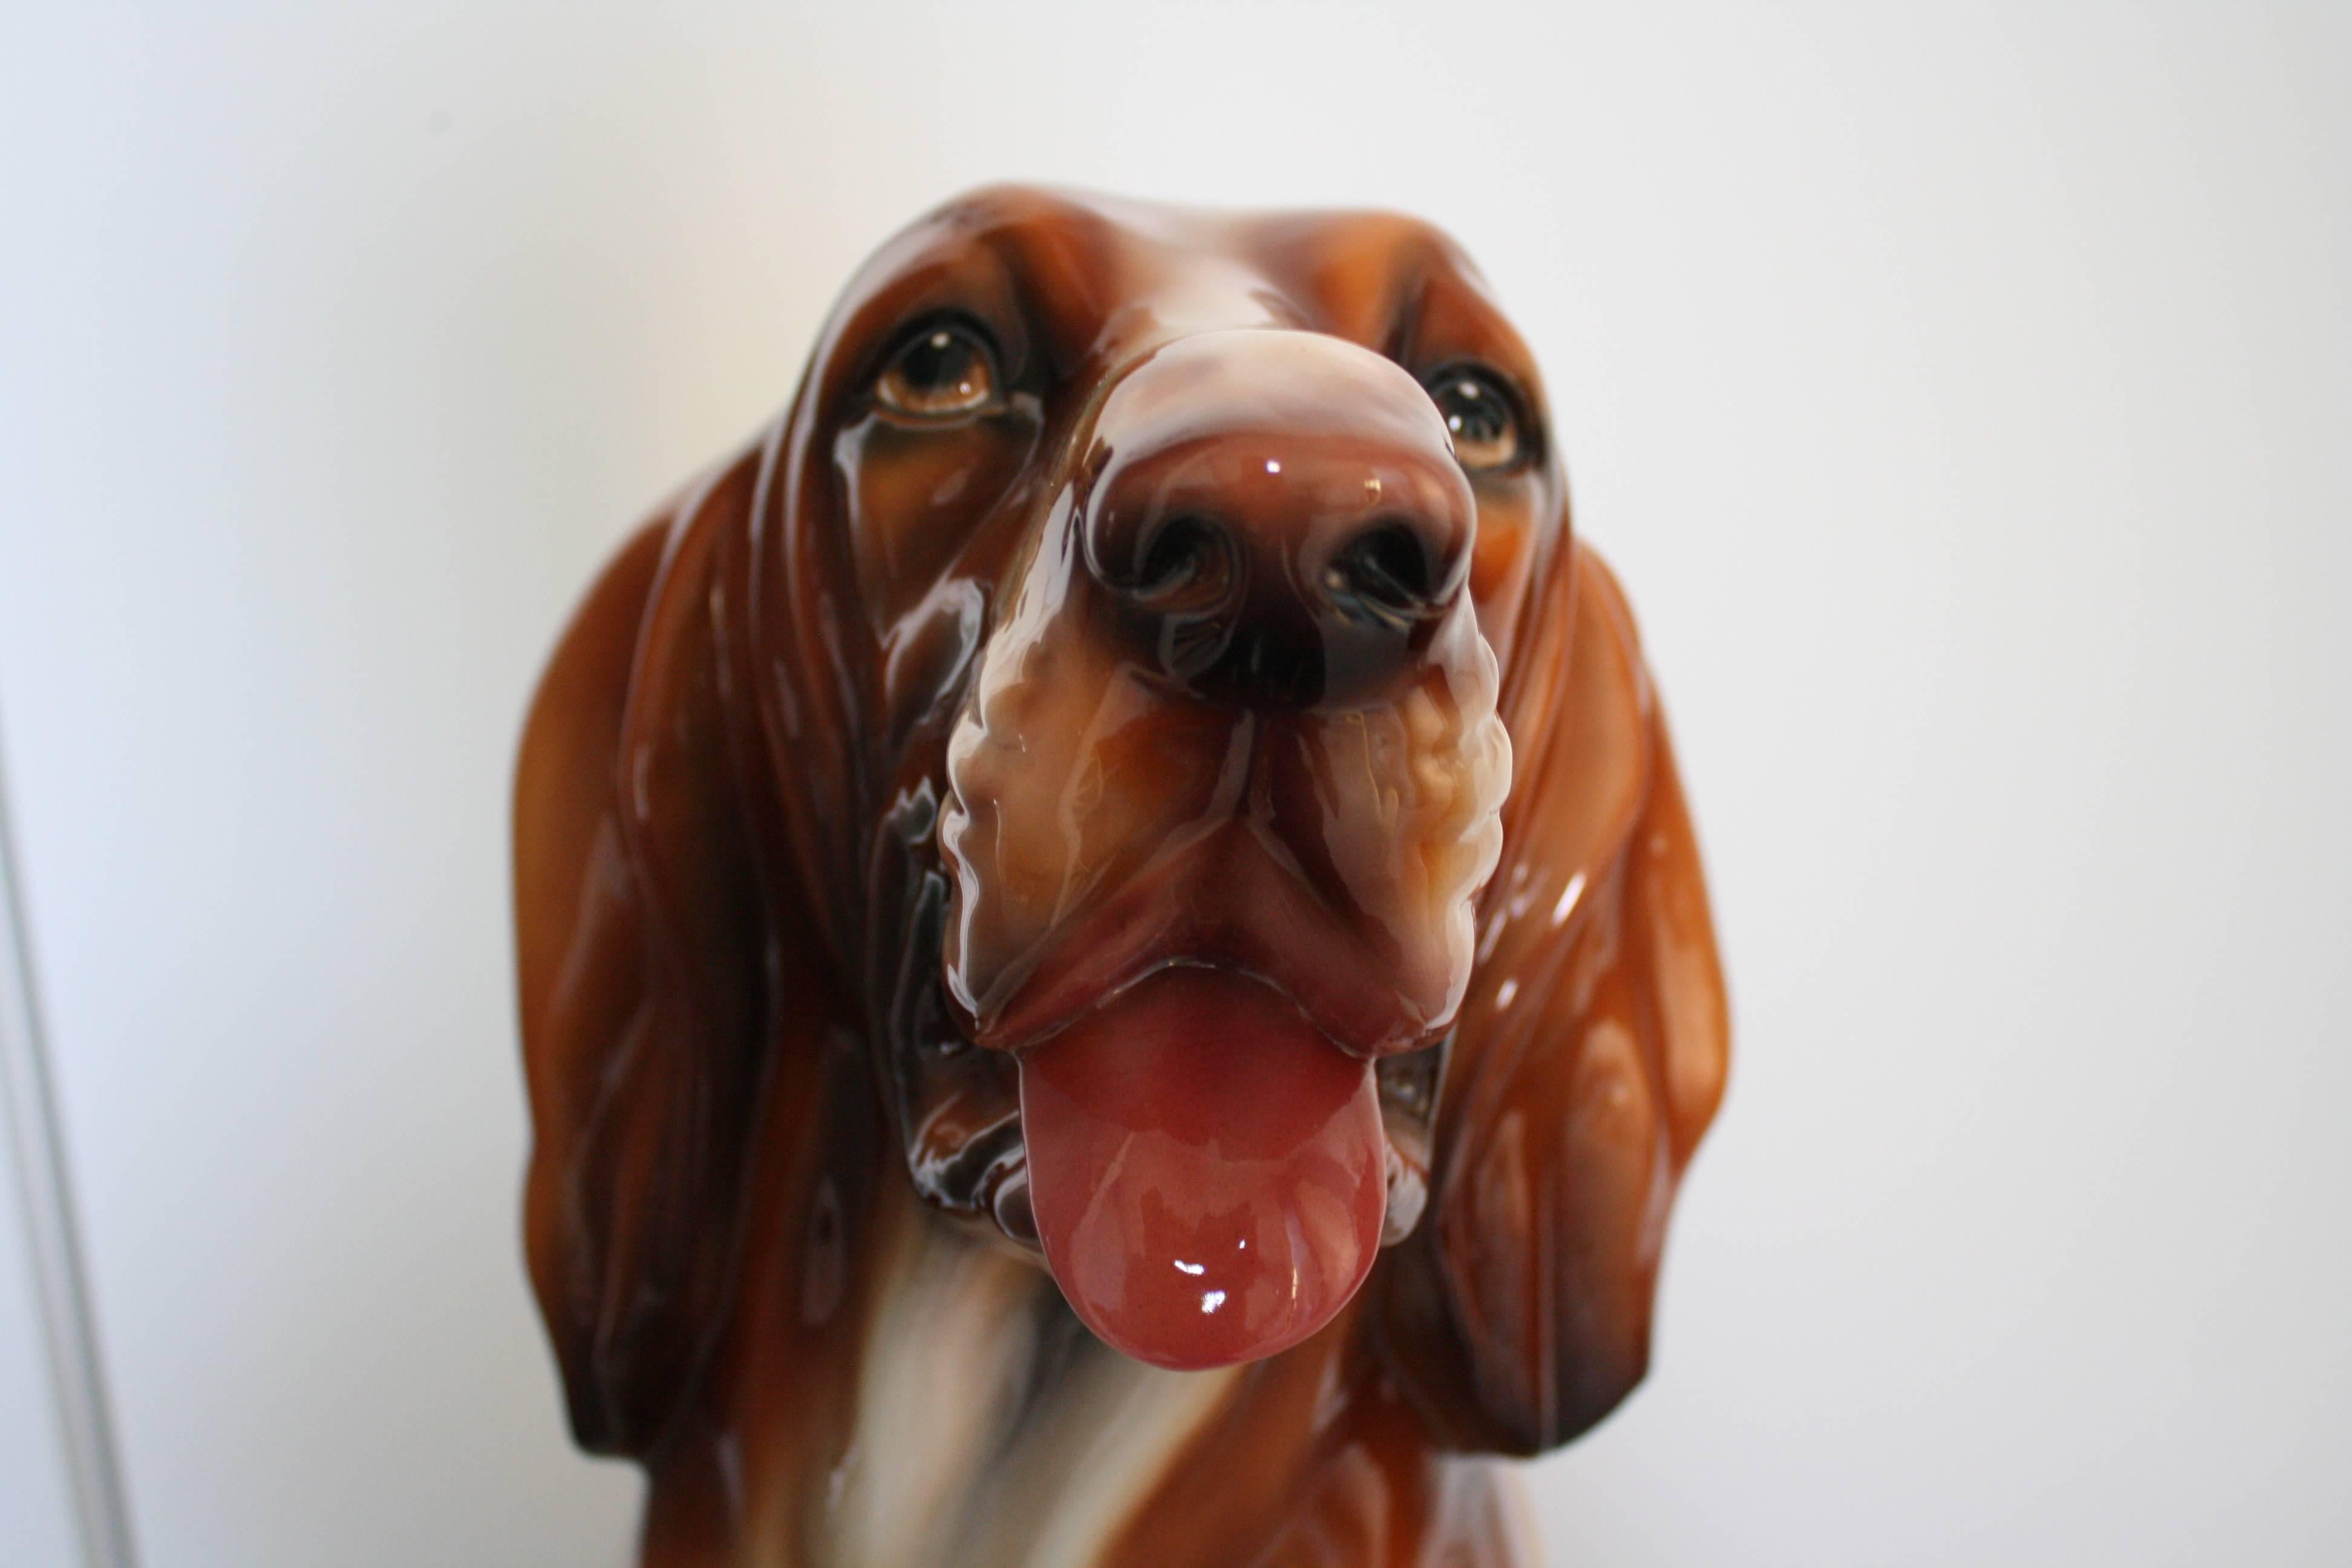 Life-Sized Ceramic Dog Sculpture, Italy, 1970s For Sale 1